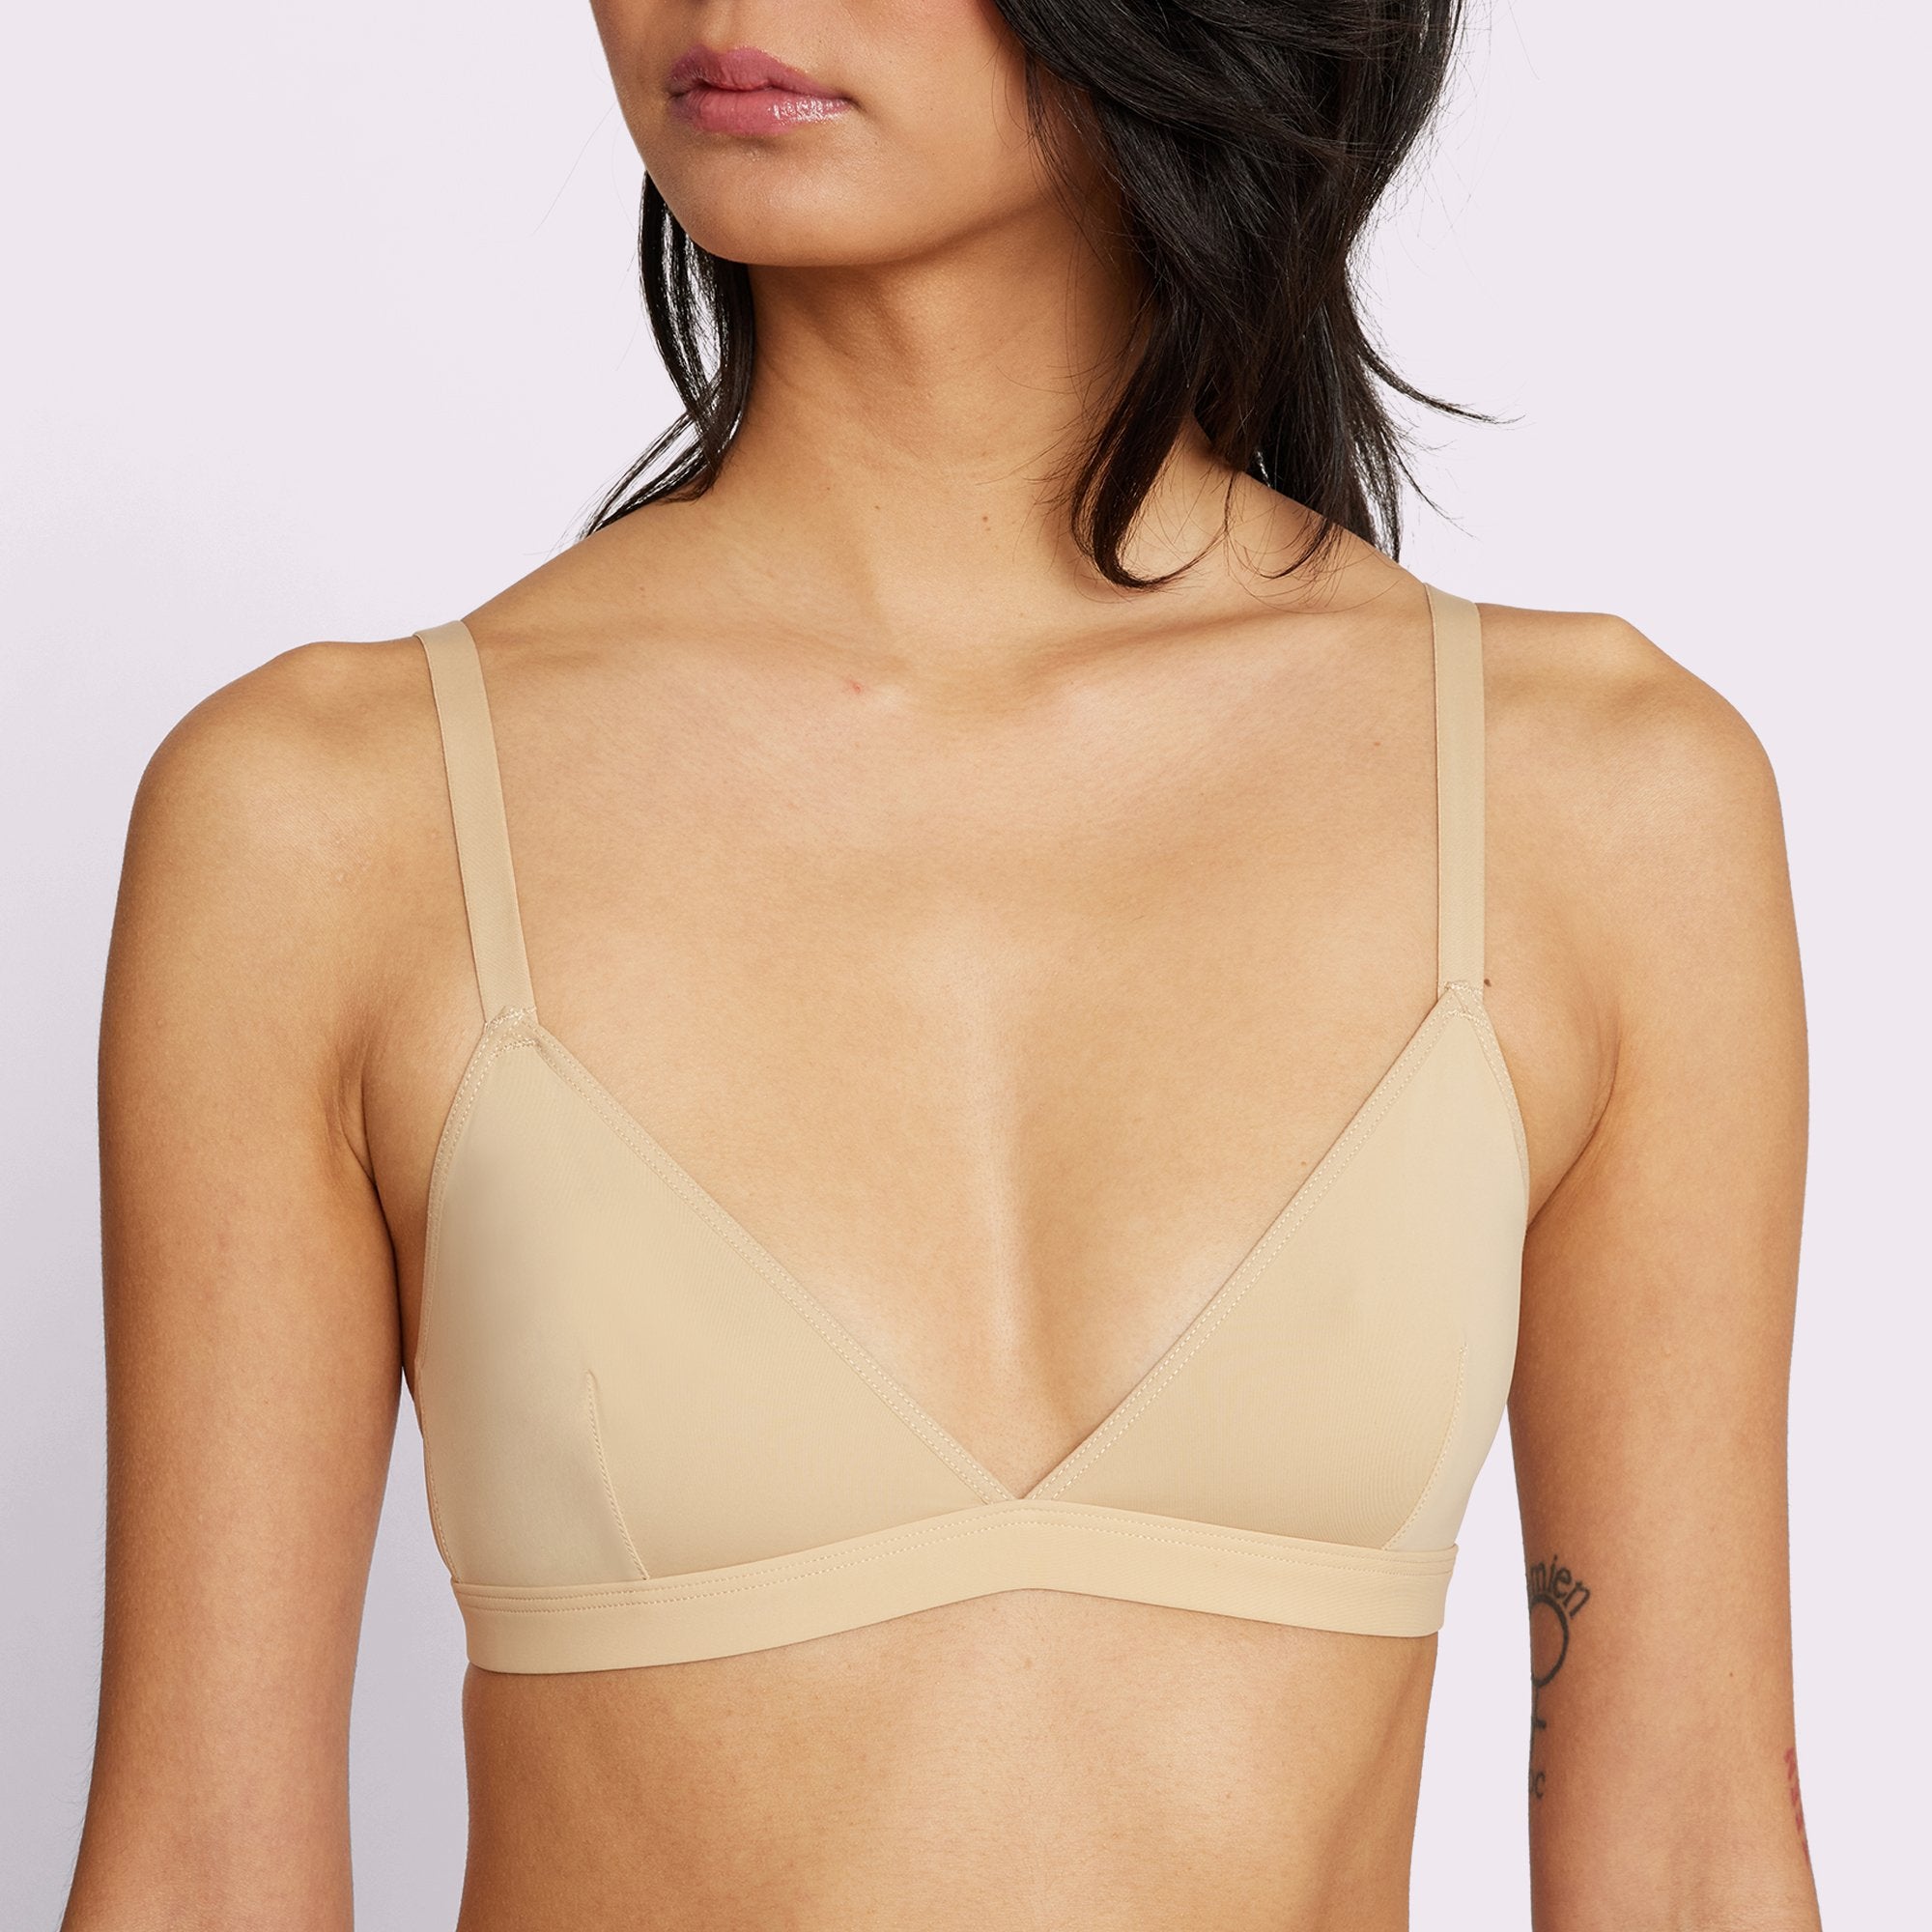 My Honest Review Of Parade's New Bralettes, In Sizes XS-3XL